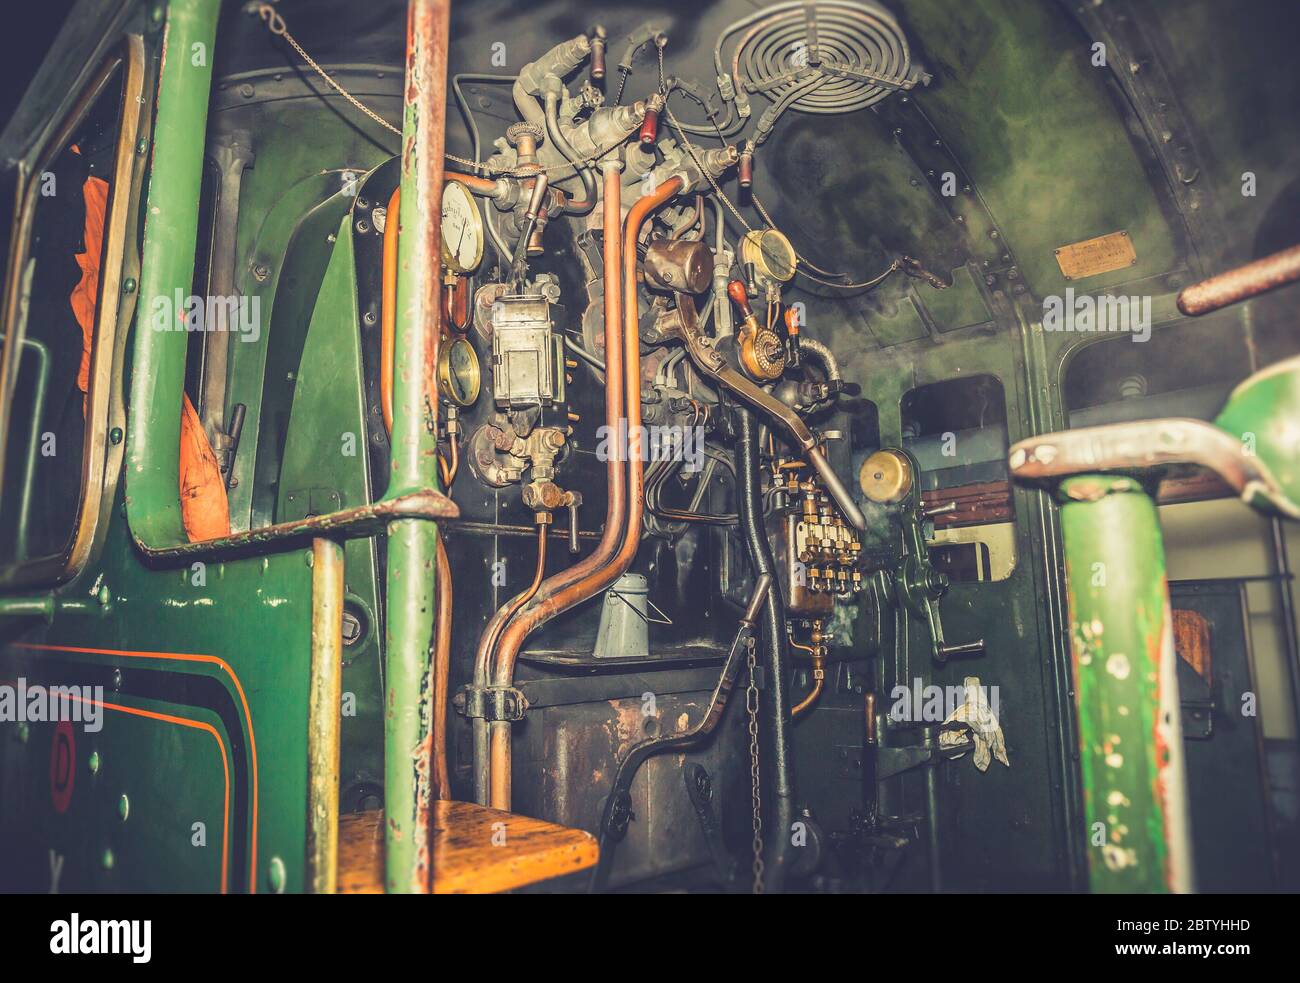 Atmospheric, close up of train driver controls inside vintage UK steam locomotive cab at night. Driving vintage trains. Stock Photo